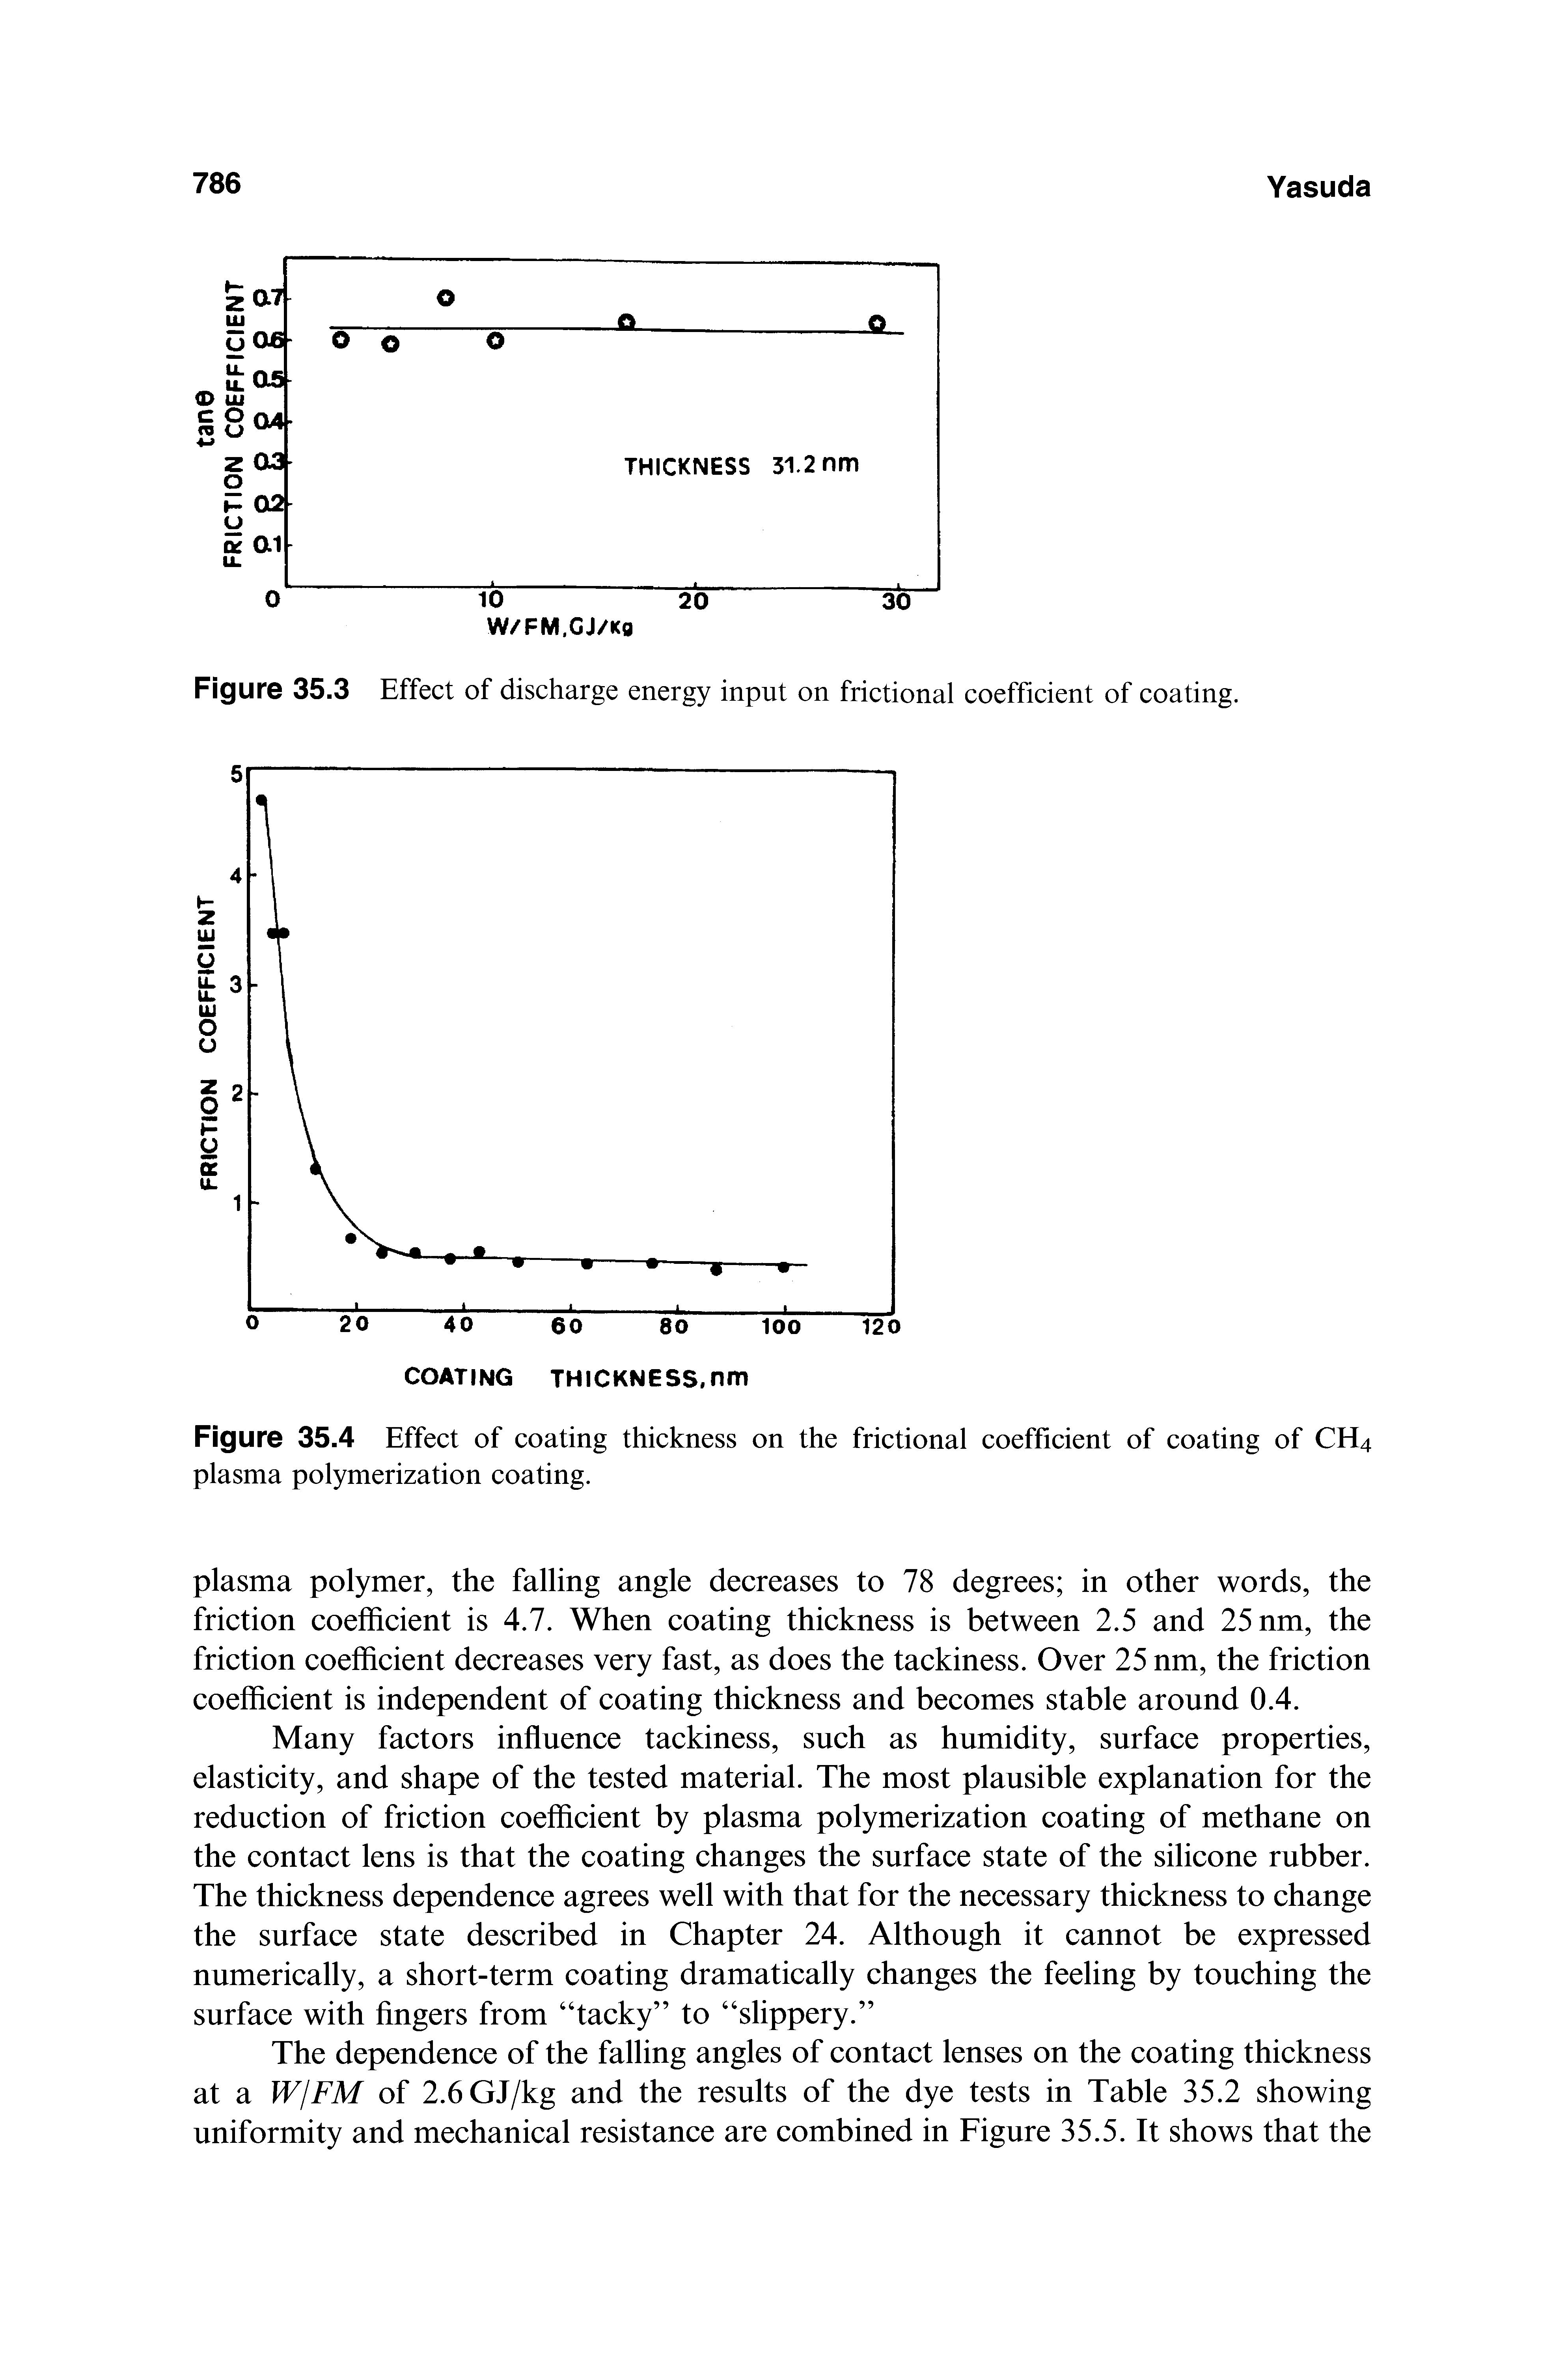 Figure 35.3 Effect of discharge energy input on frictional coefficient of coating.